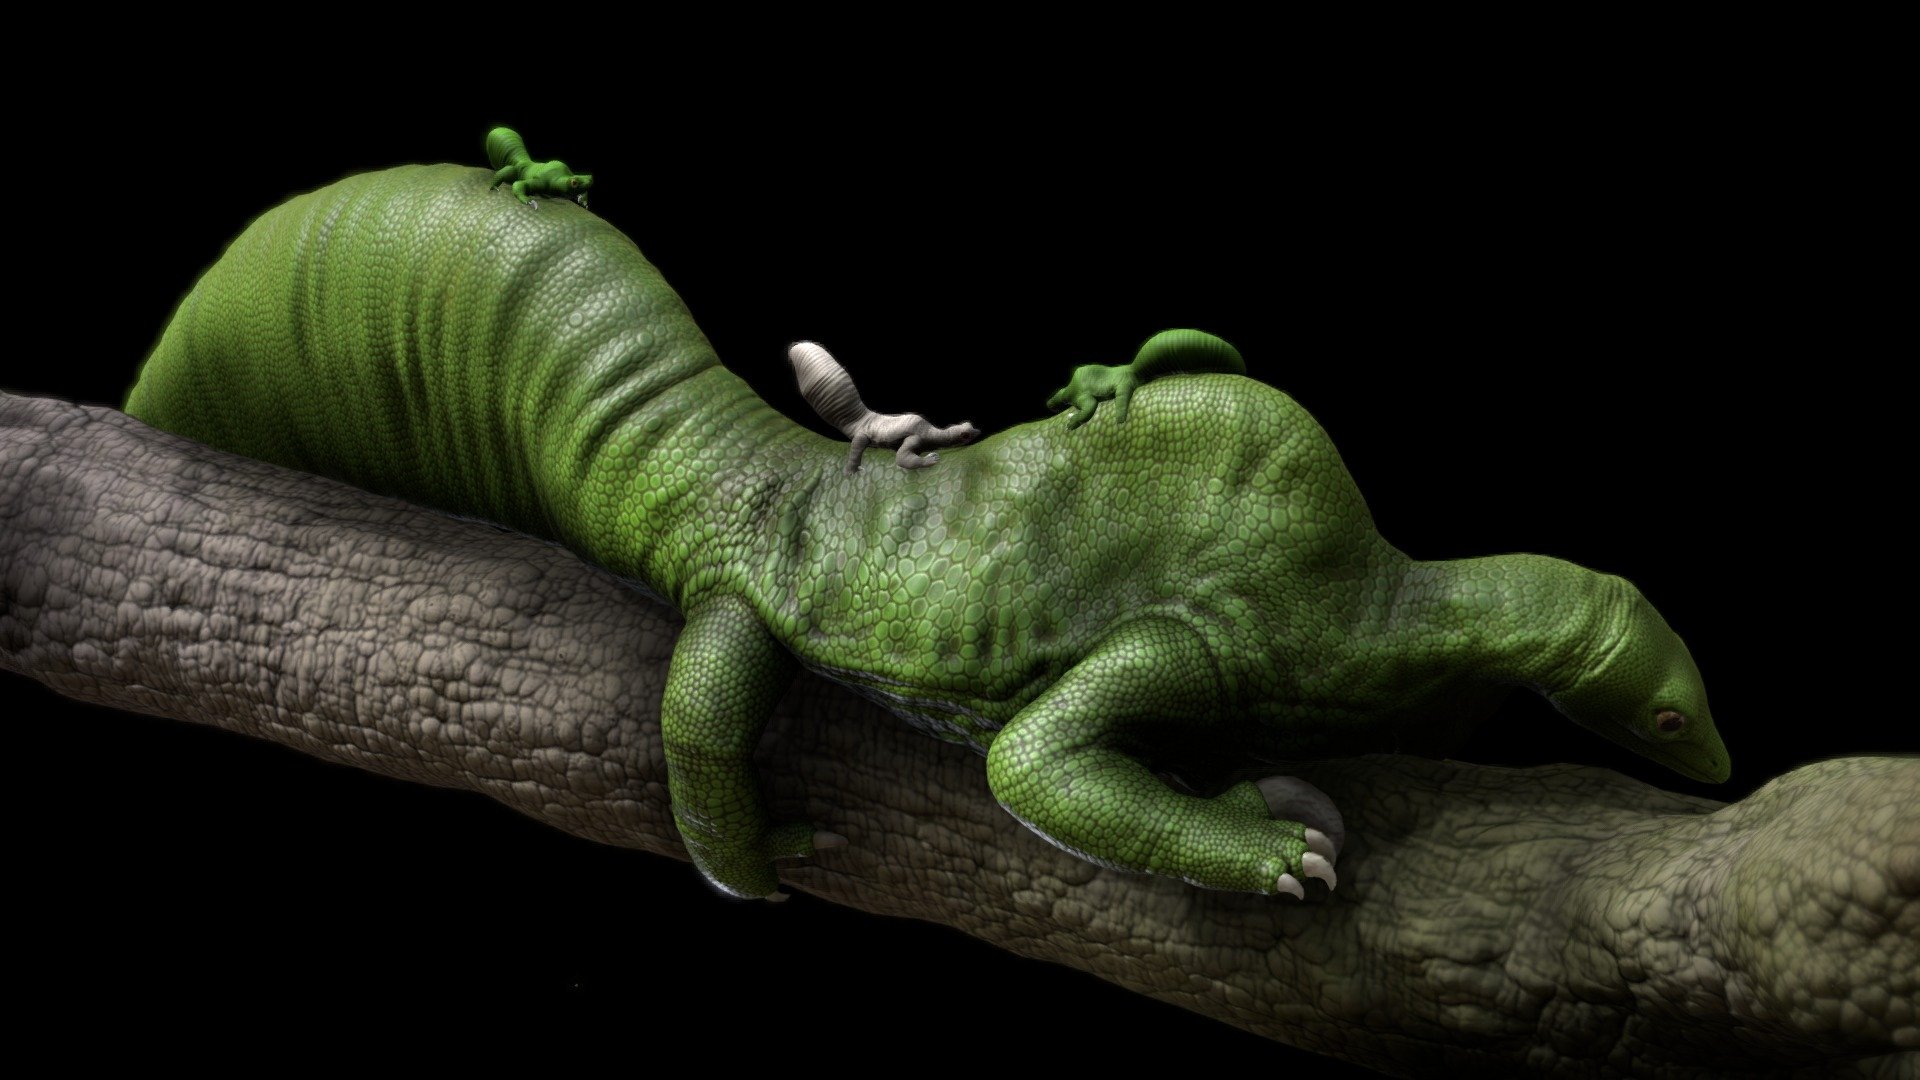 Artwork I made a while ago in ZBrush. Decided it was time to upload it so I can be seen in 3D.

Drepanosaurus was a strange little avicephal critter that lived during the triassic period 3d model